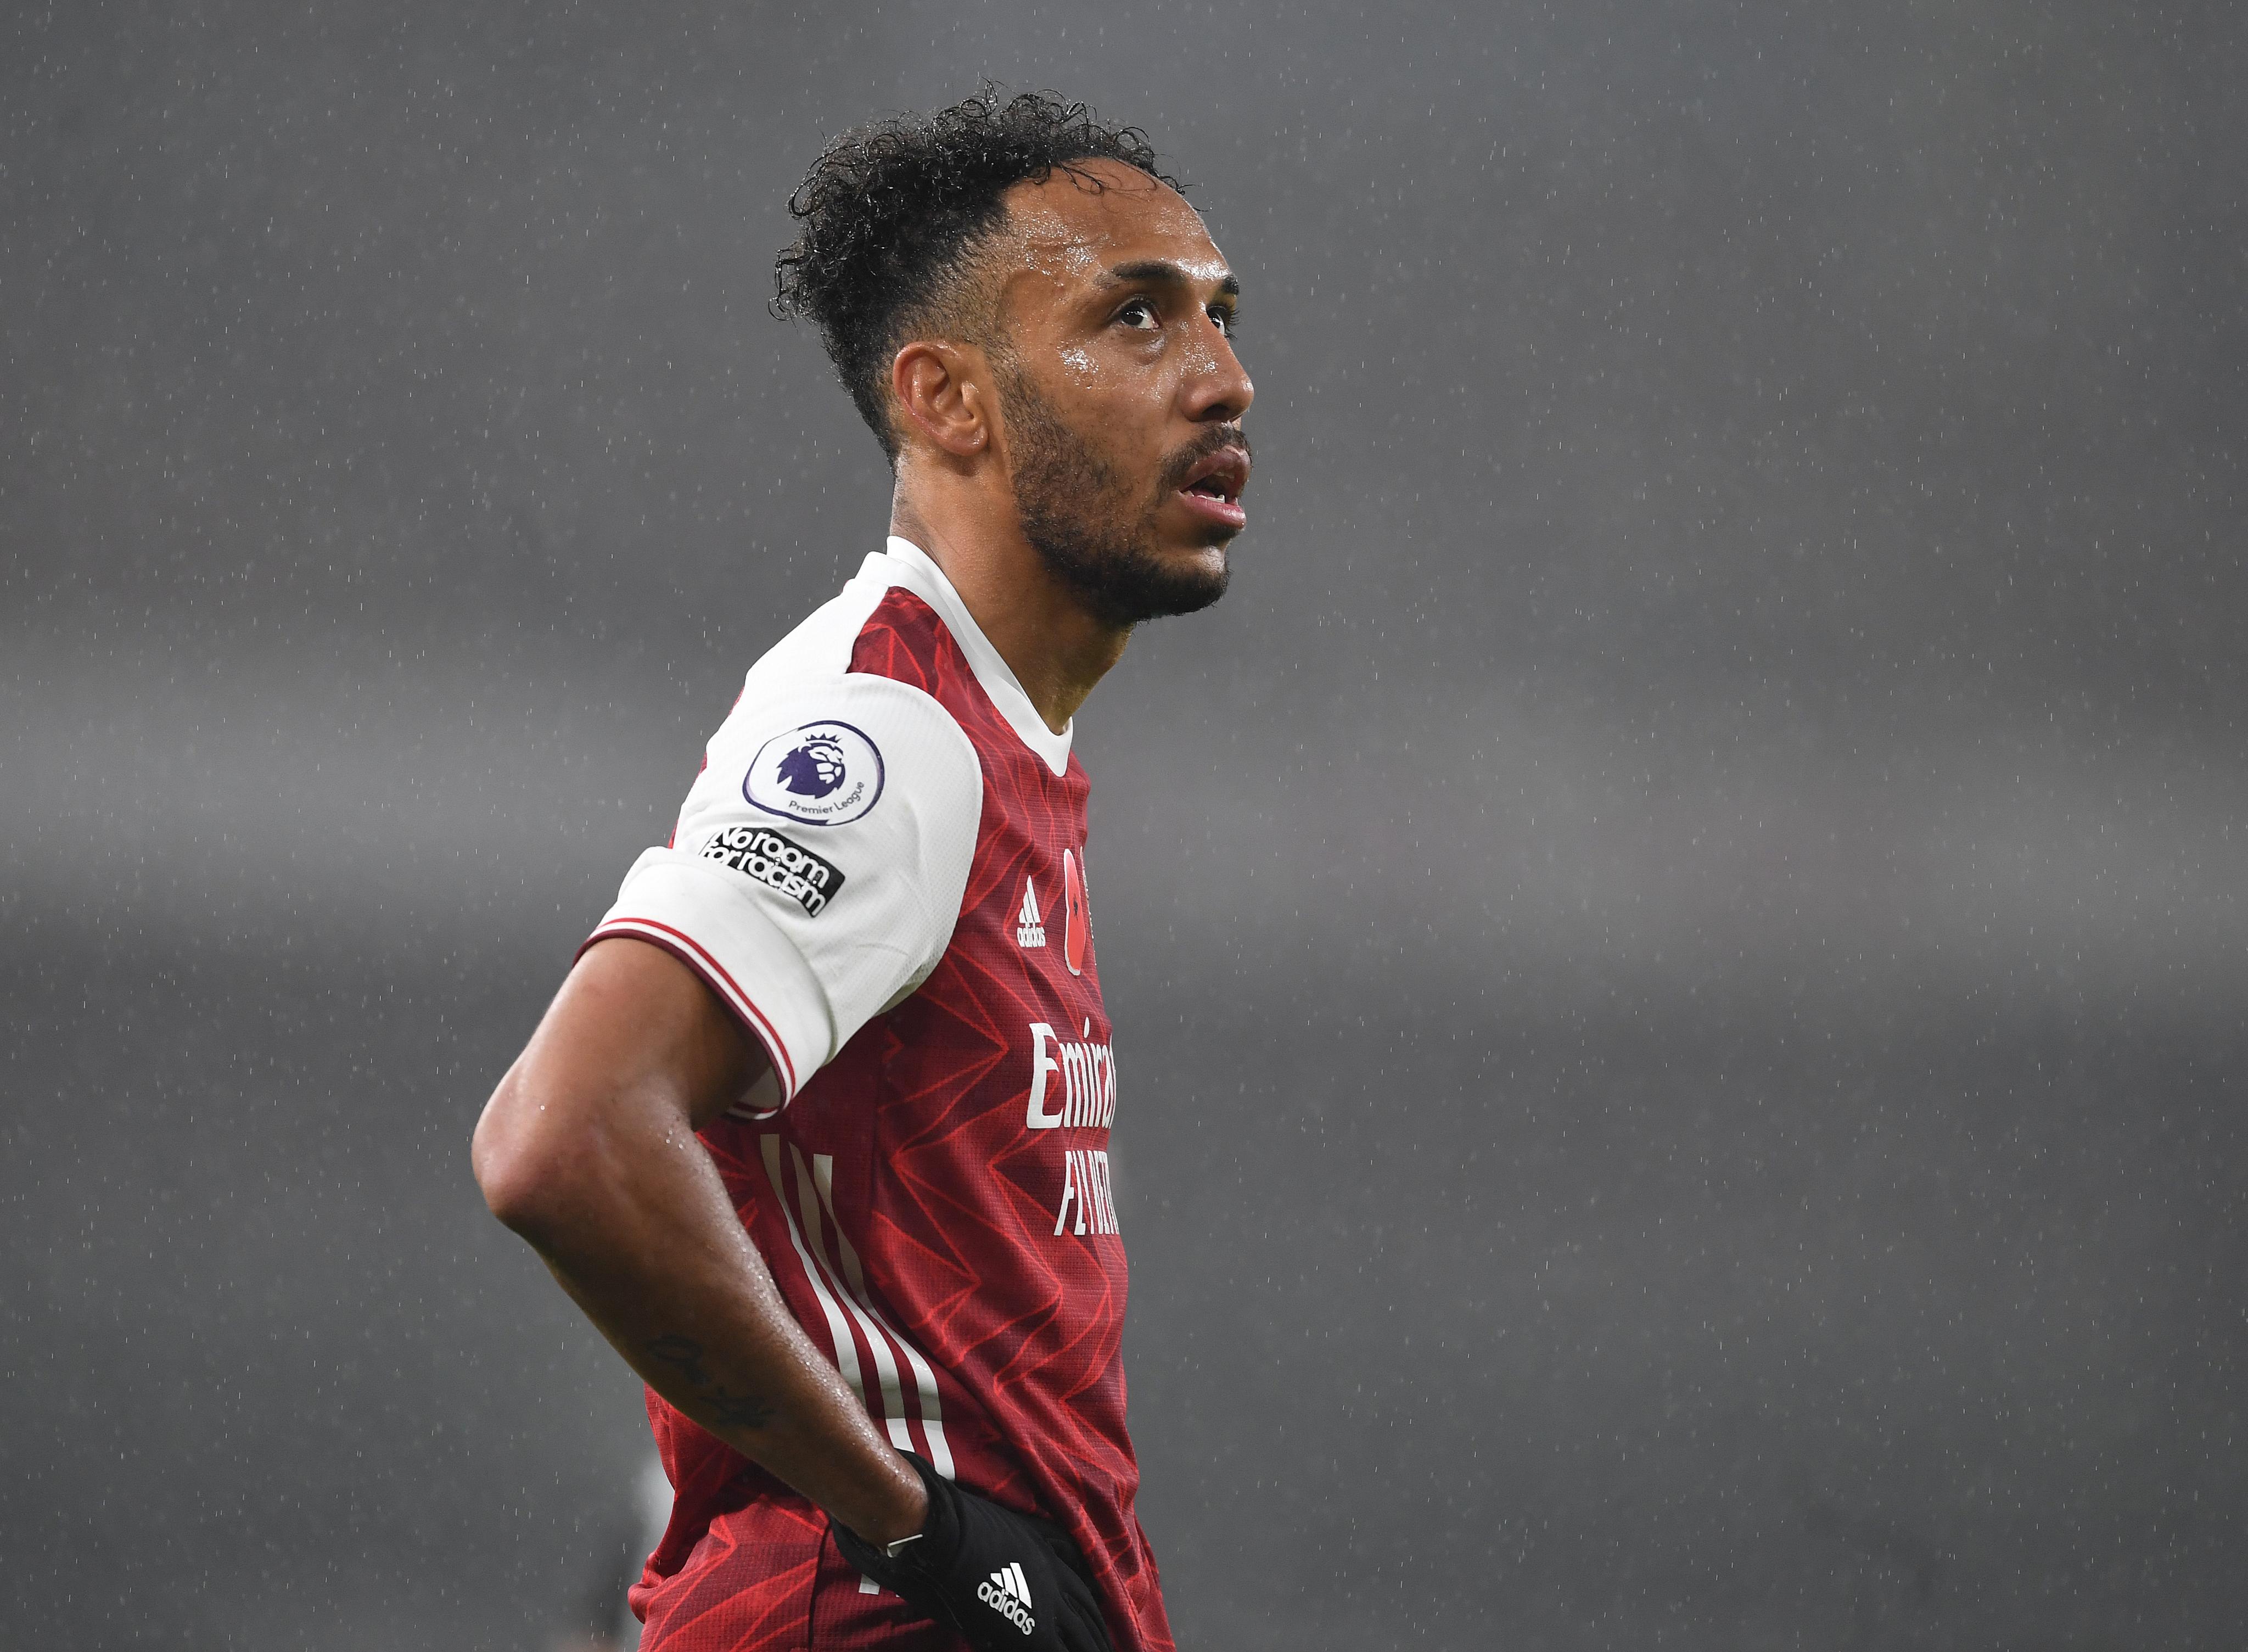 It's not an easy situation that we want to have Pierre-Emerick Aubameyang in, admits Mikel Arteta